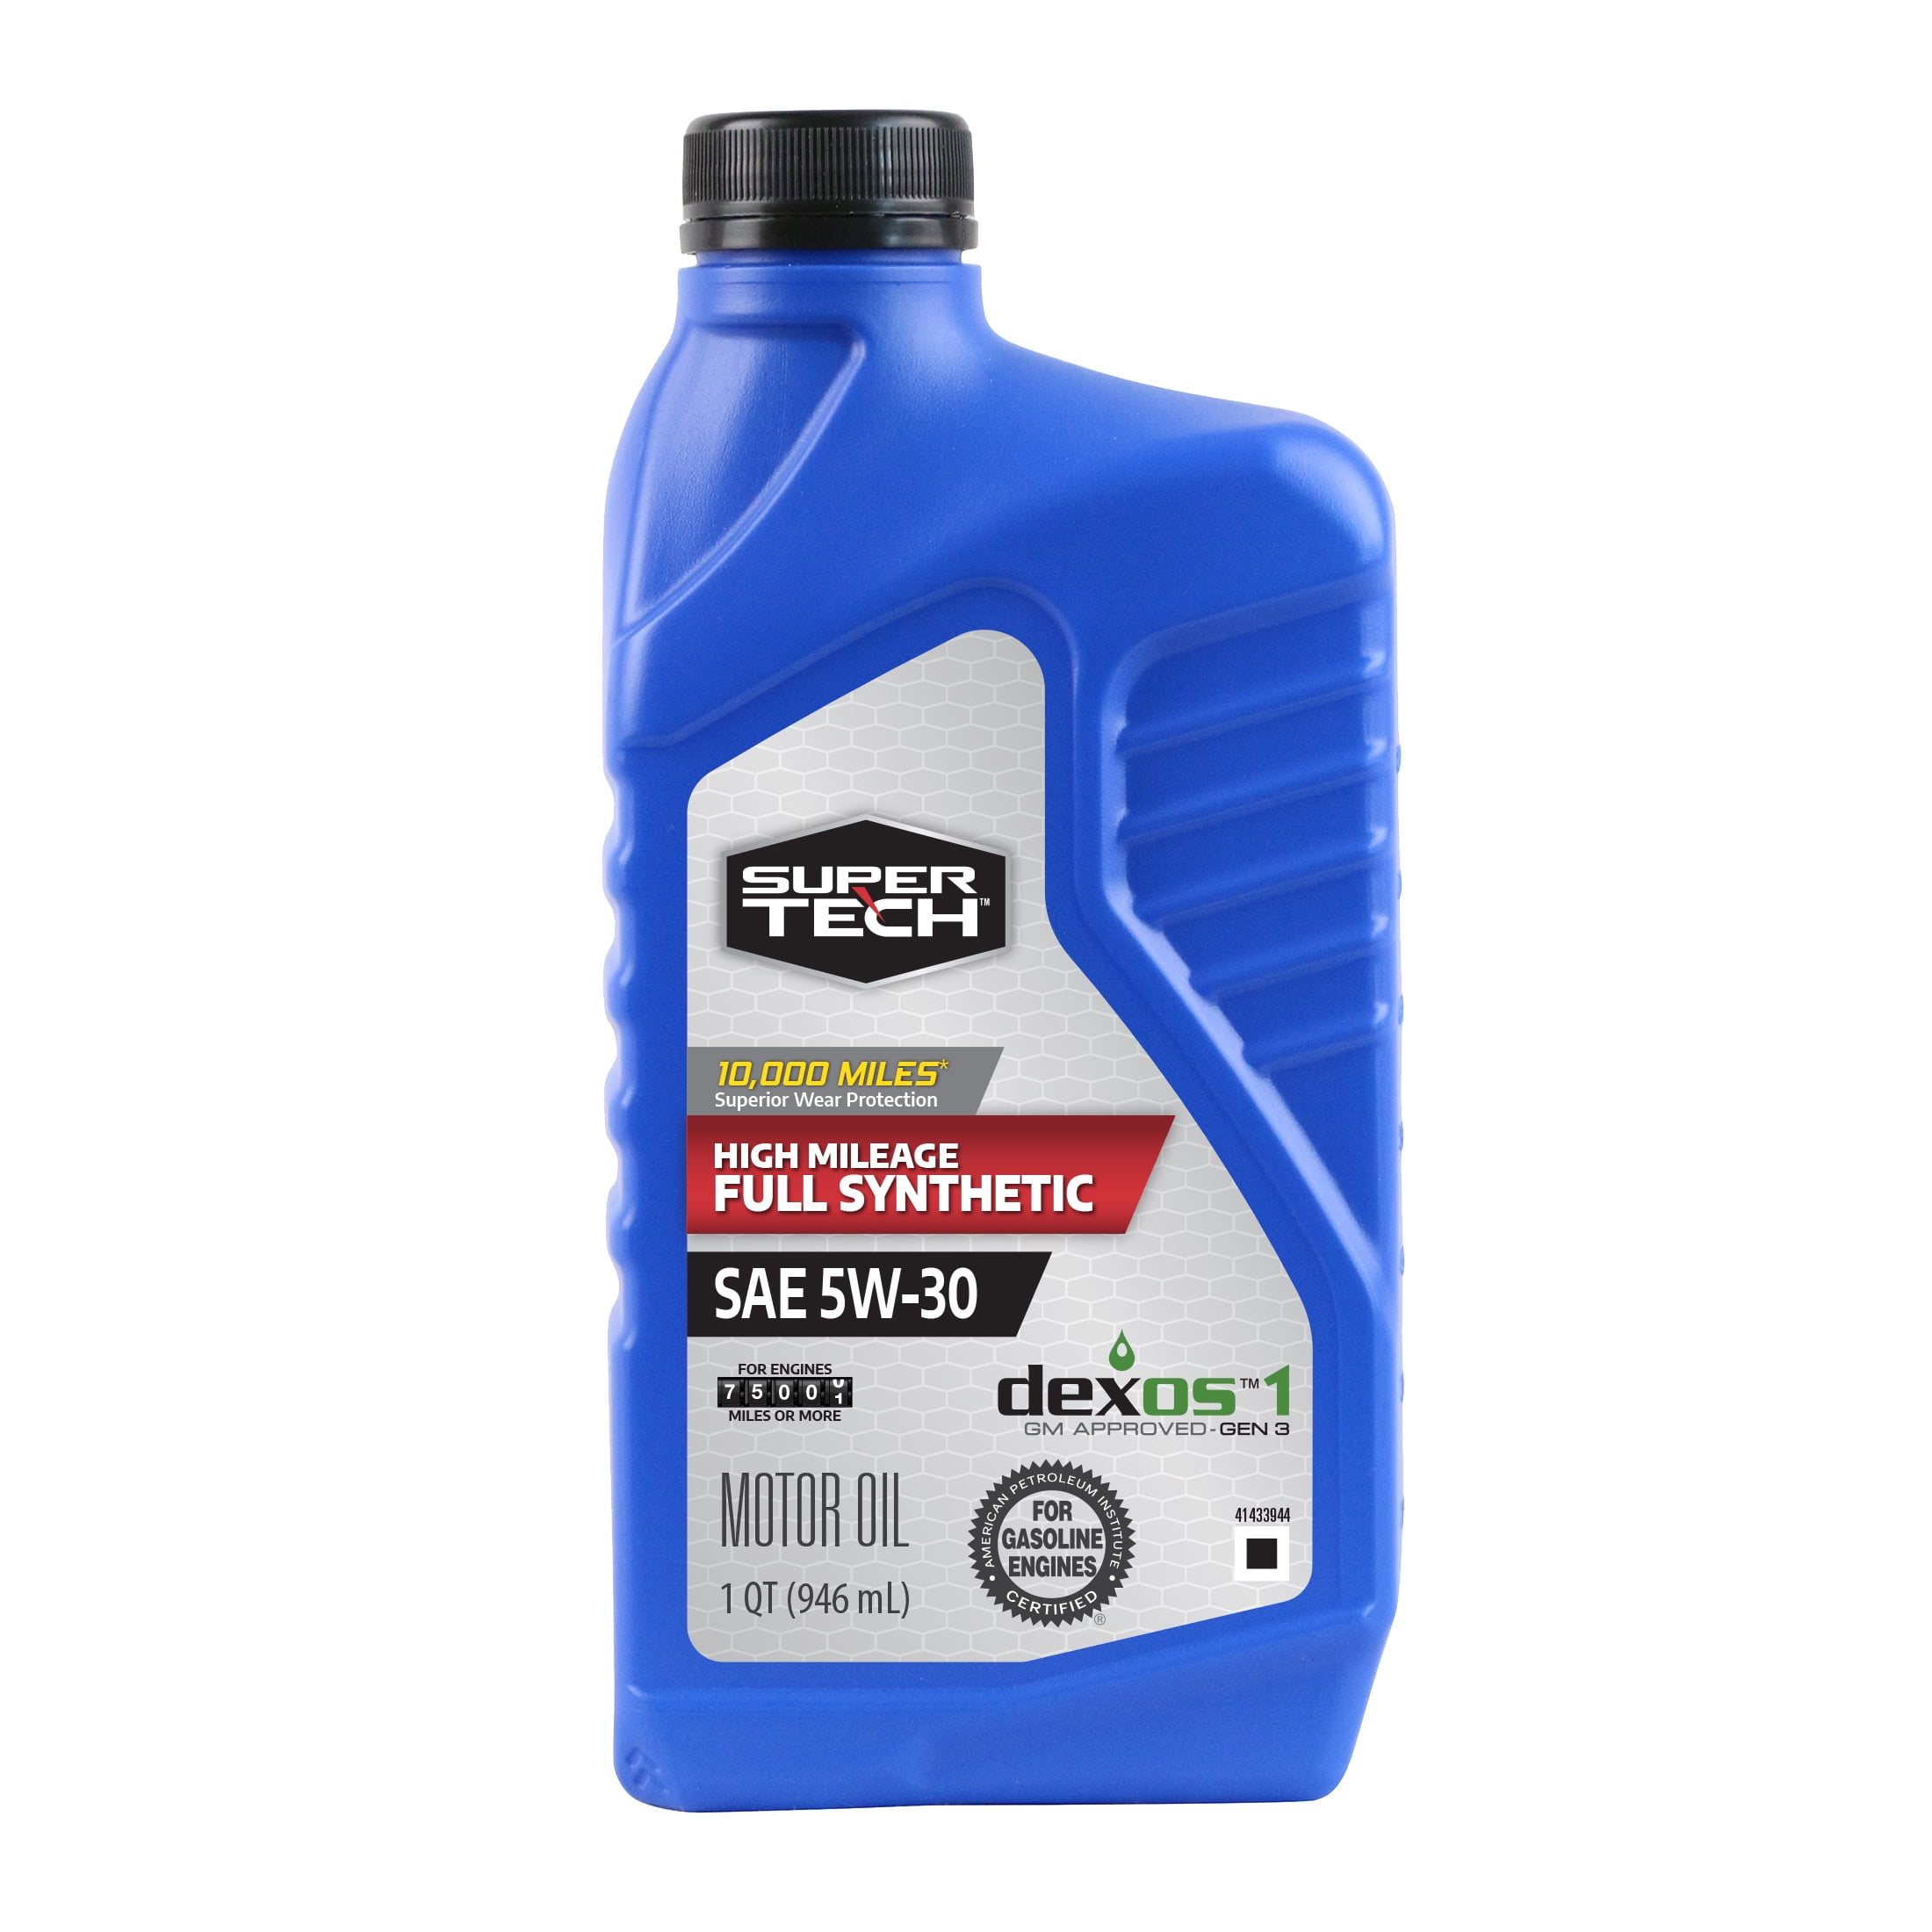 Super Tech High Mileage Full Synthetic SAE 5W-30 Motor Oil - 1 Qt